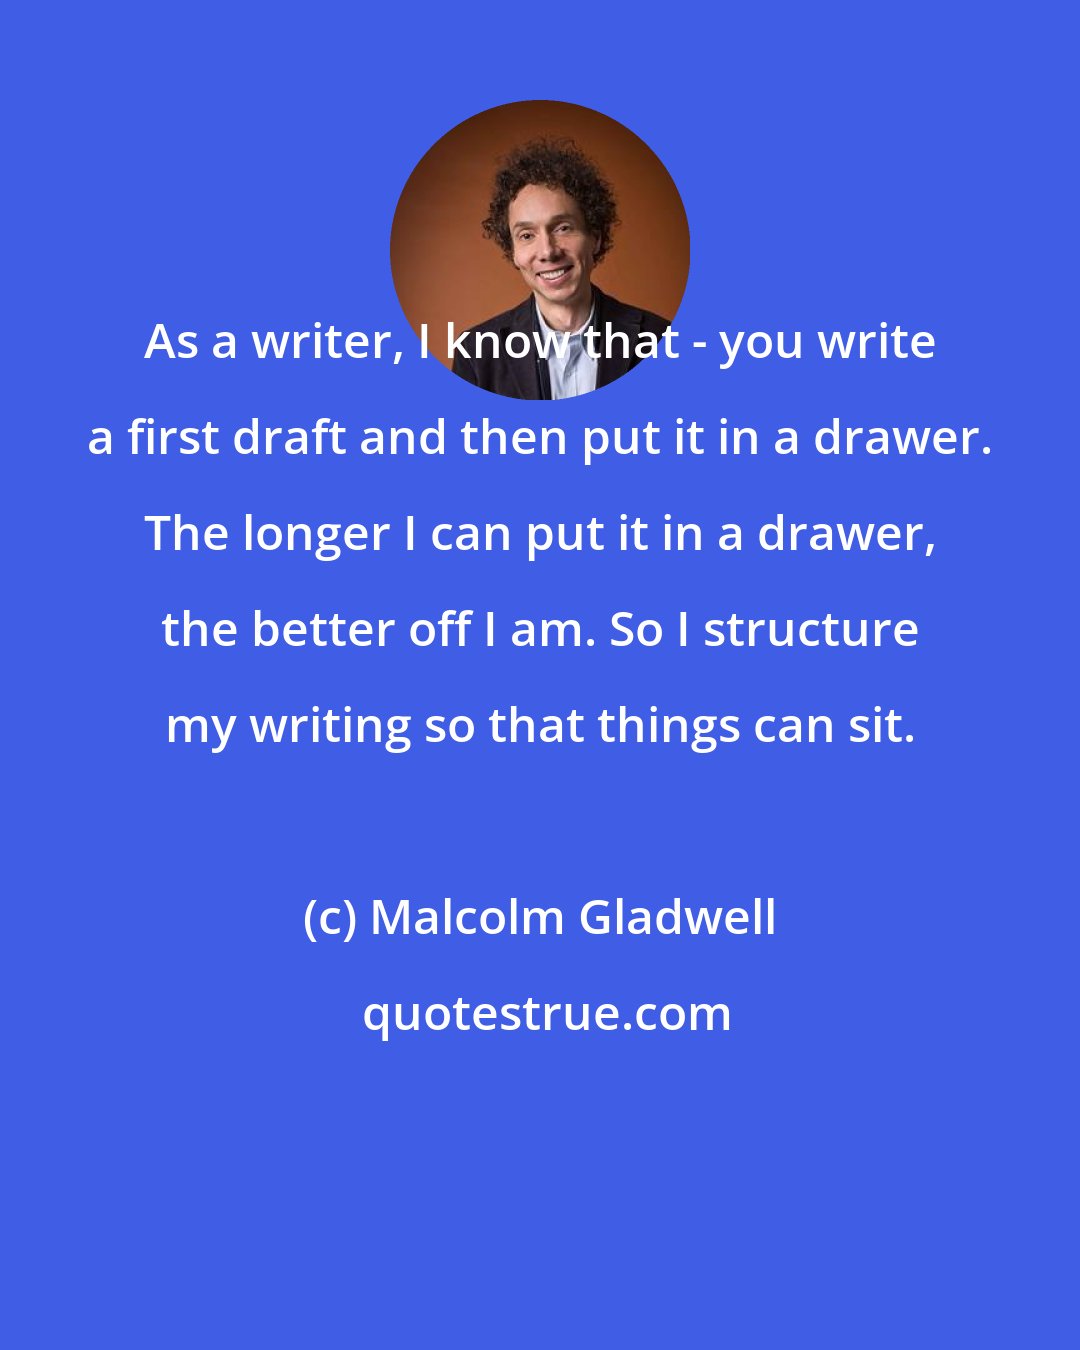 Malcolm Gladwell: As a writer, I know that - you write a first draft and then put it in a drawer. The longer I can put it in a drawer, the better off I am. So I structure my writing so that things can sit.